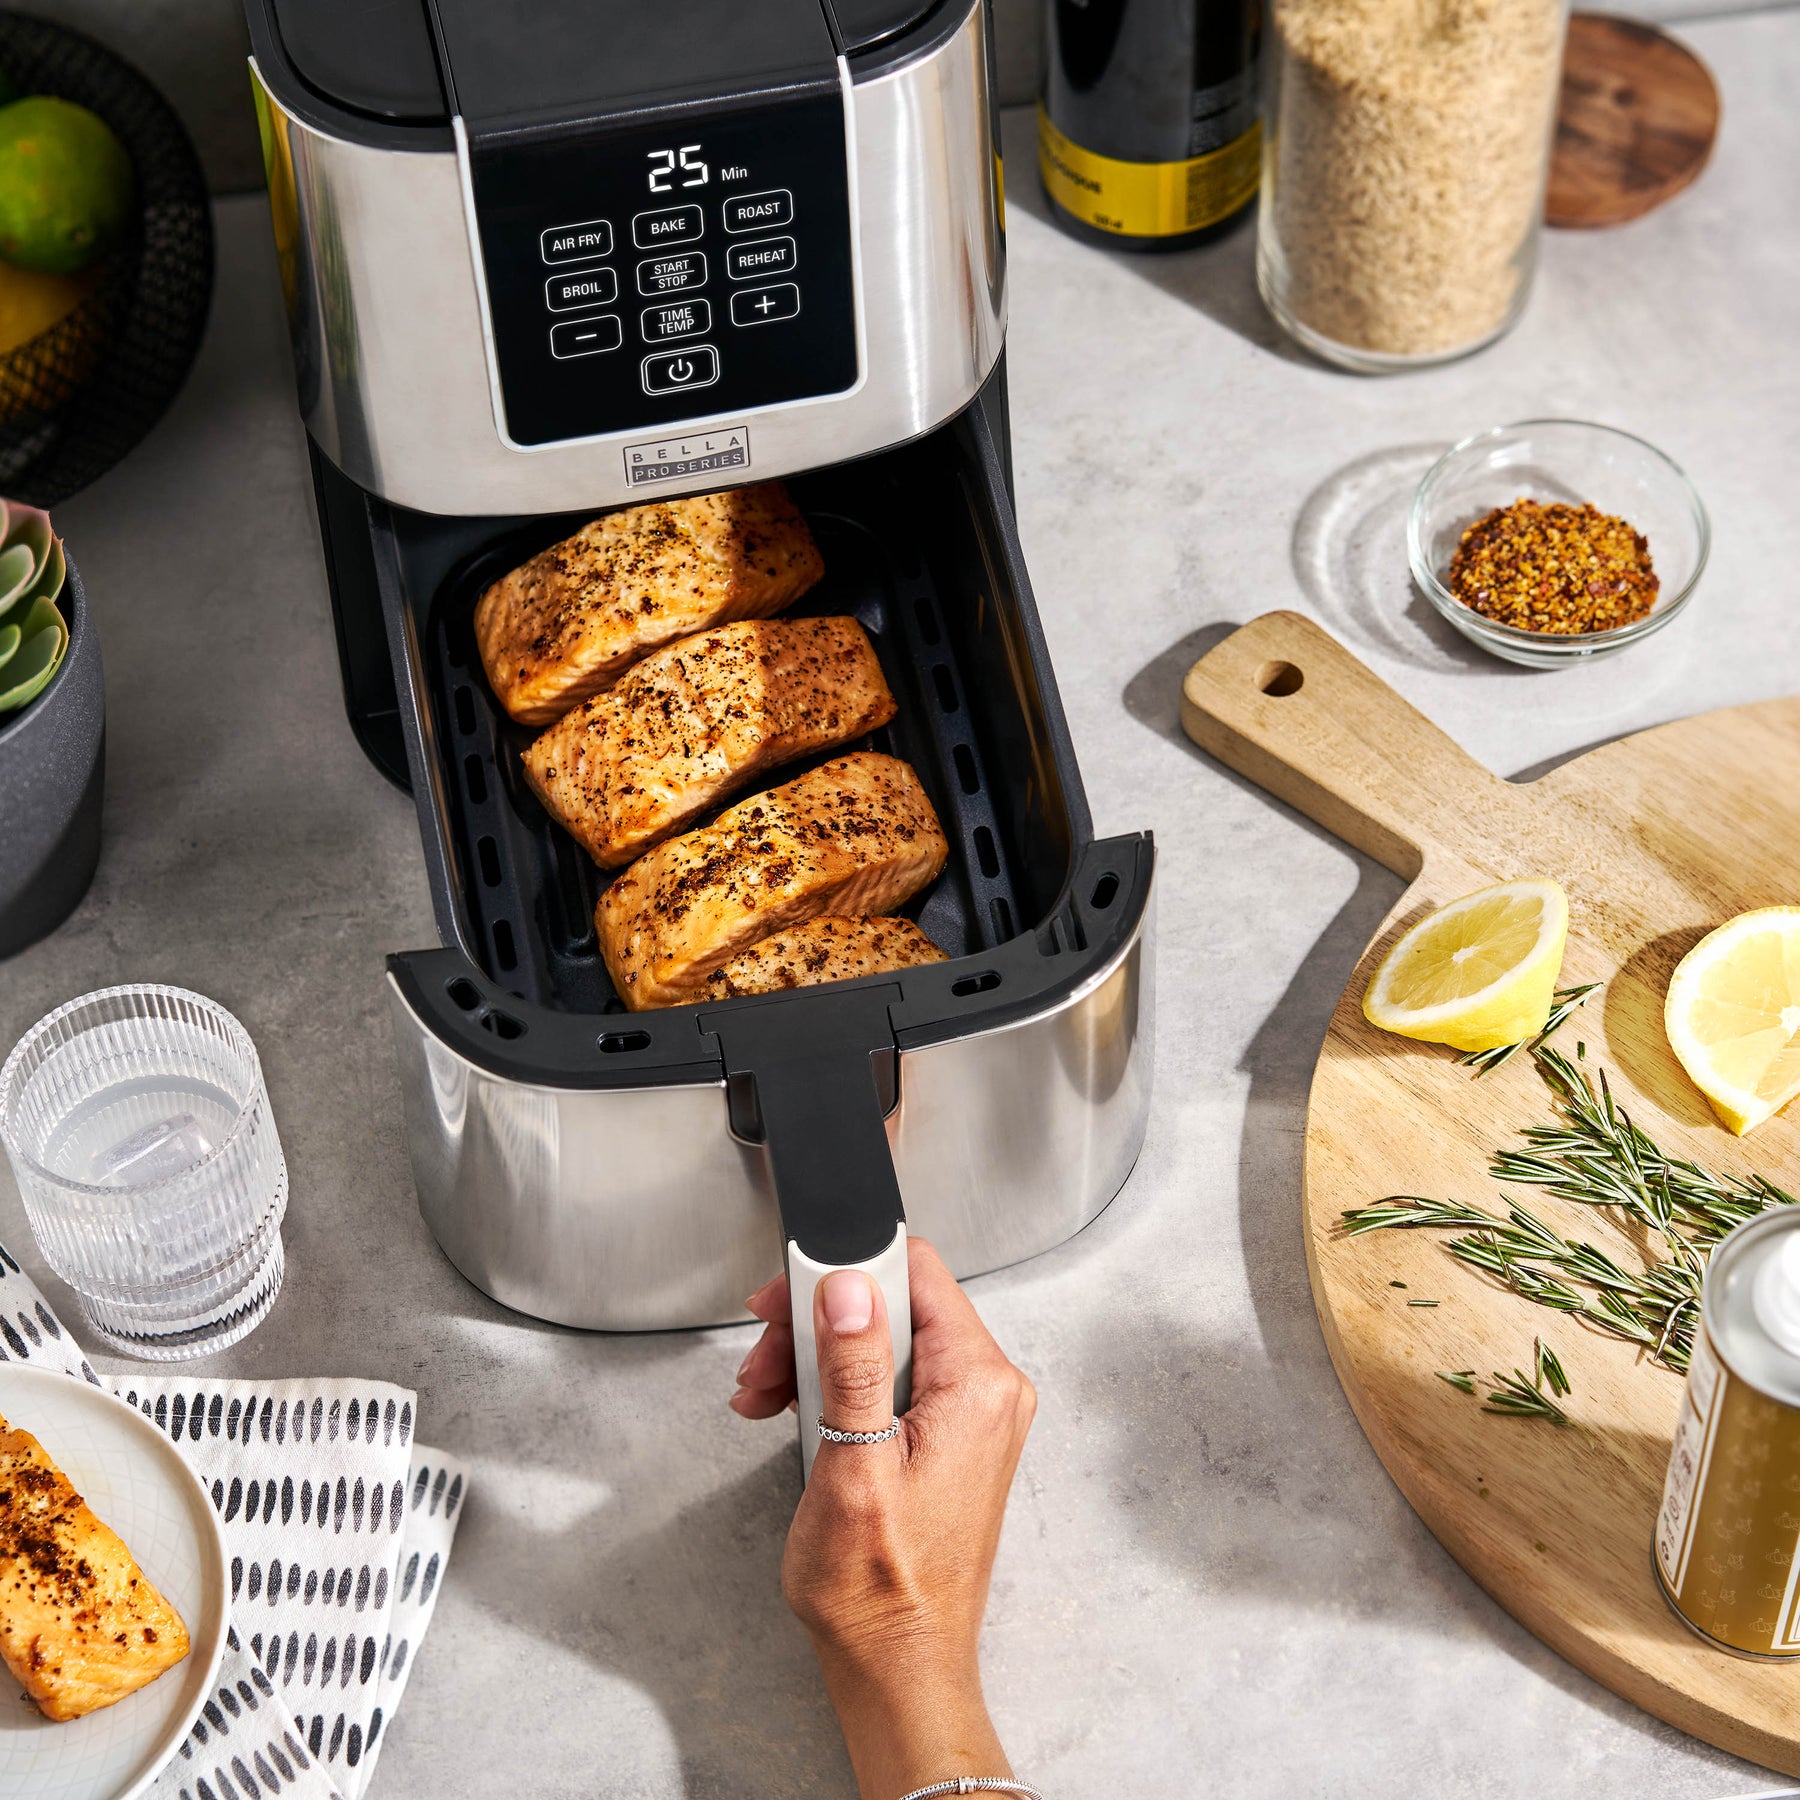 Bella Pro Touchscreen 4-qt. Air Fryer drops to $35 for today only